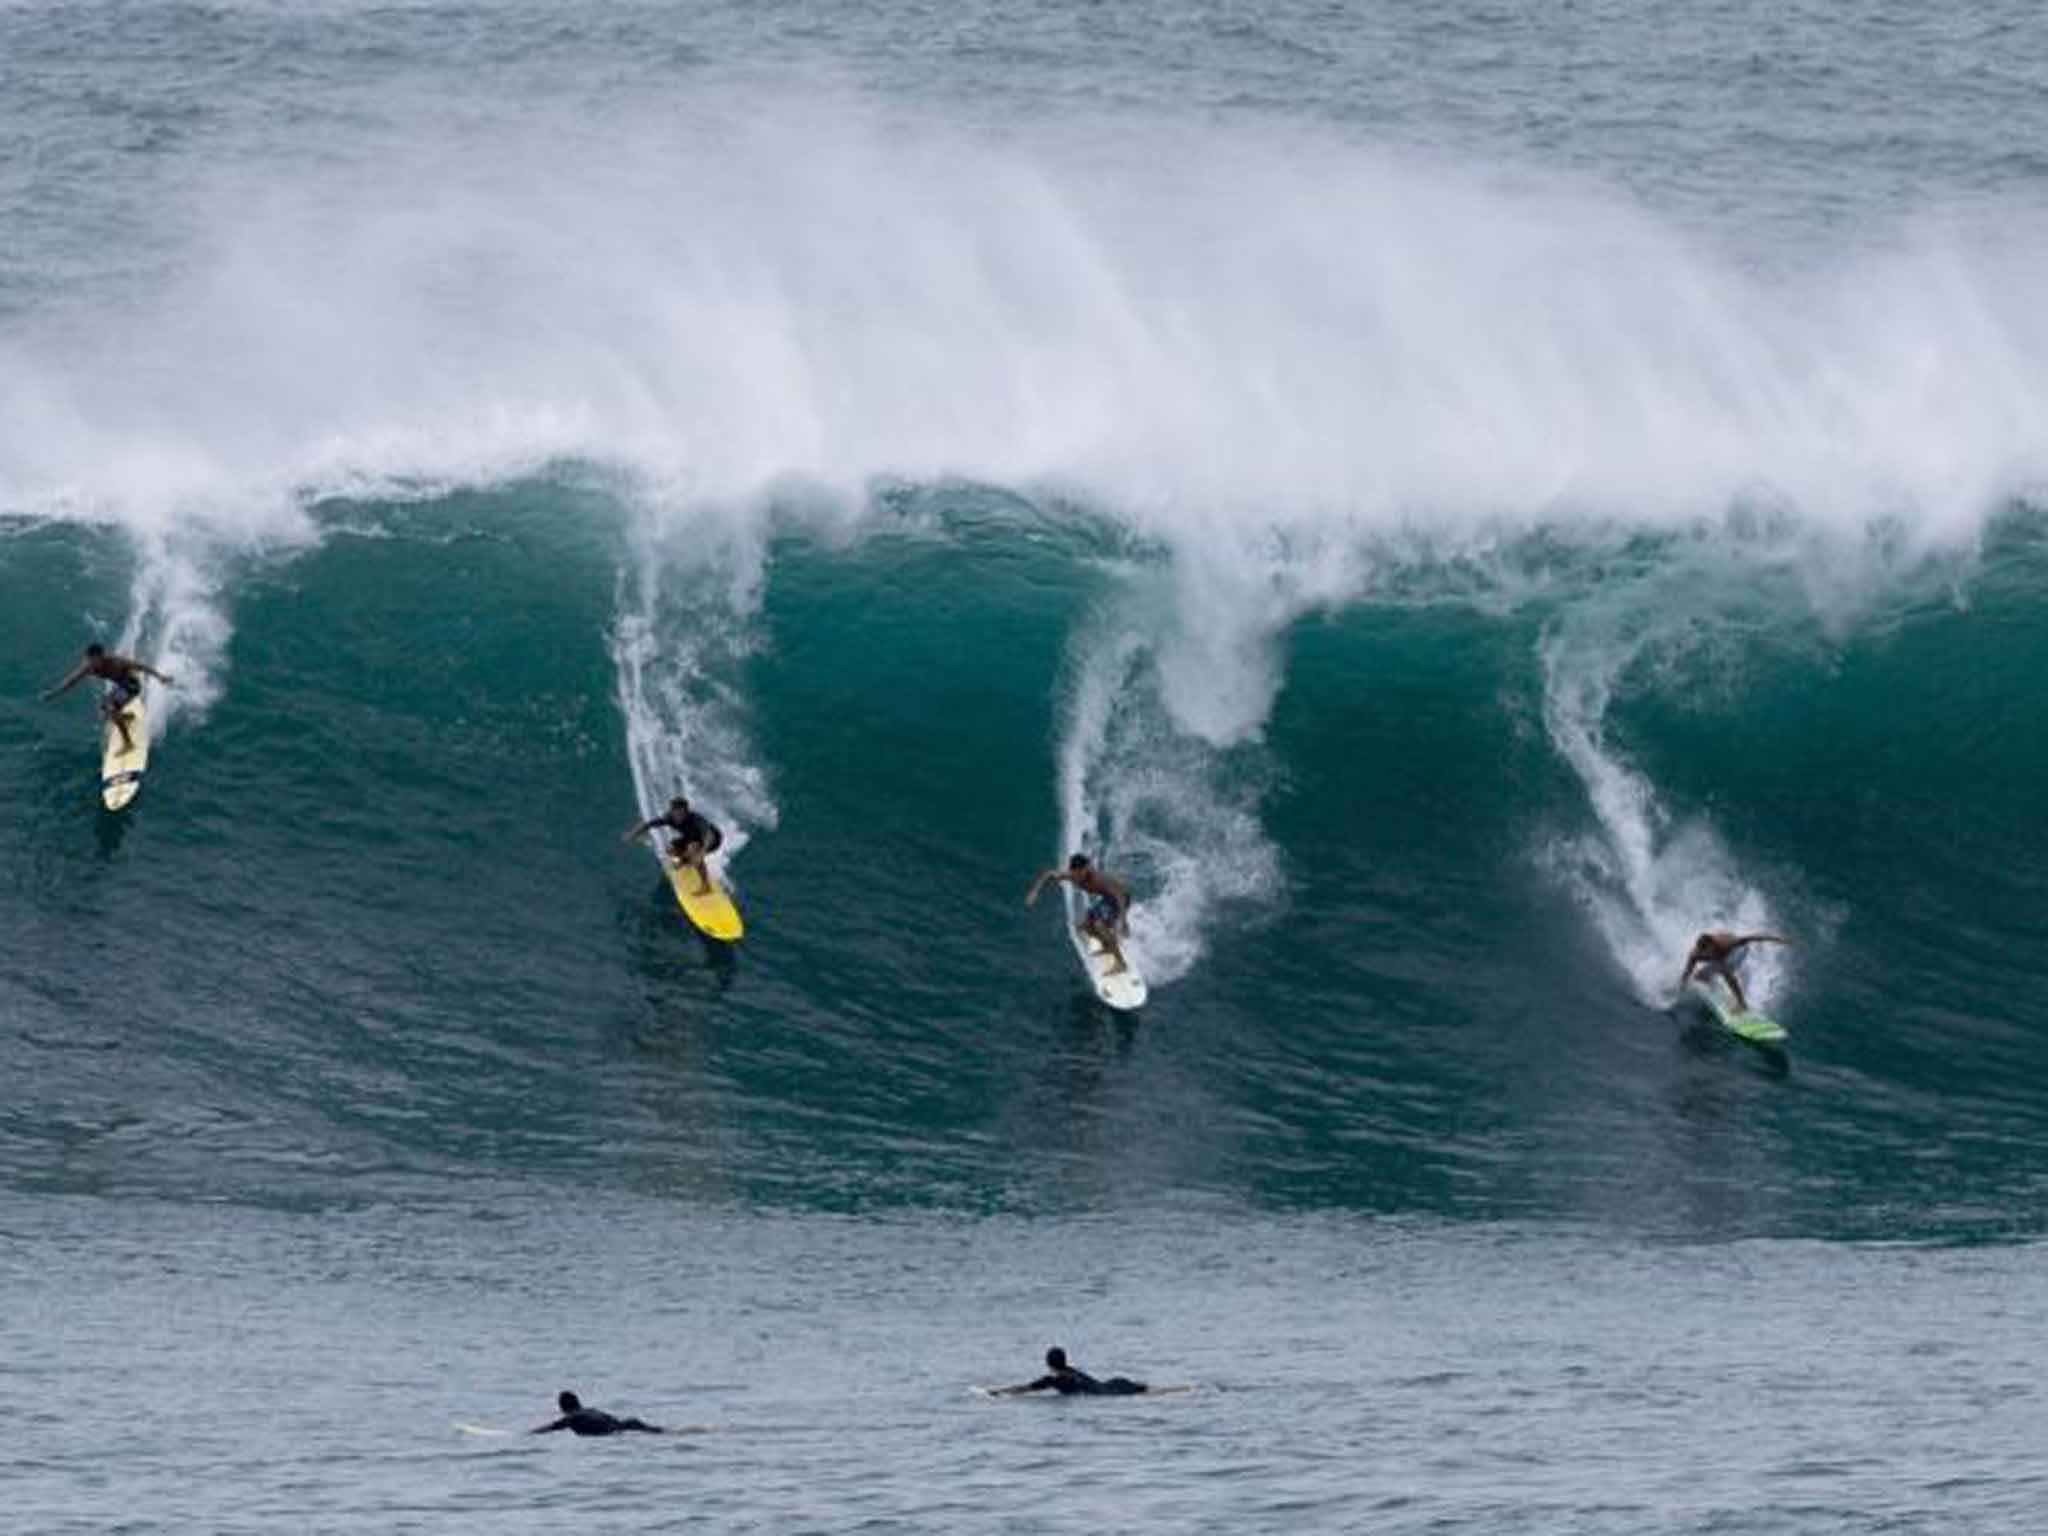 Surfers ride a wave